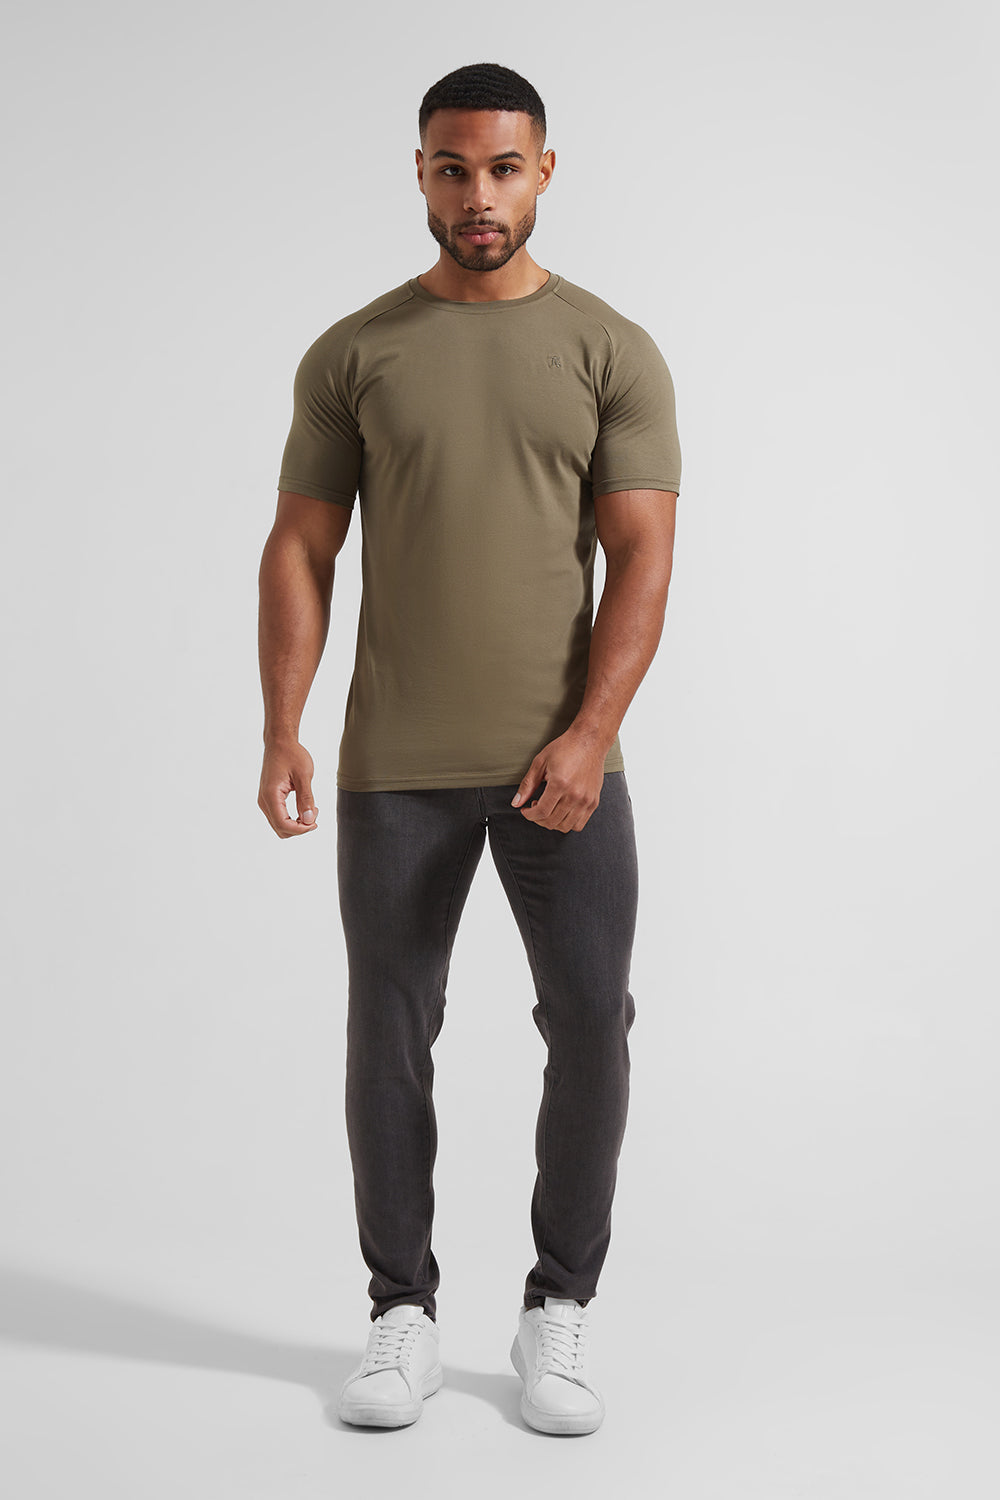 Athletic Fit T-Shirt in True Navy - TAILORED ATHLETE - USA